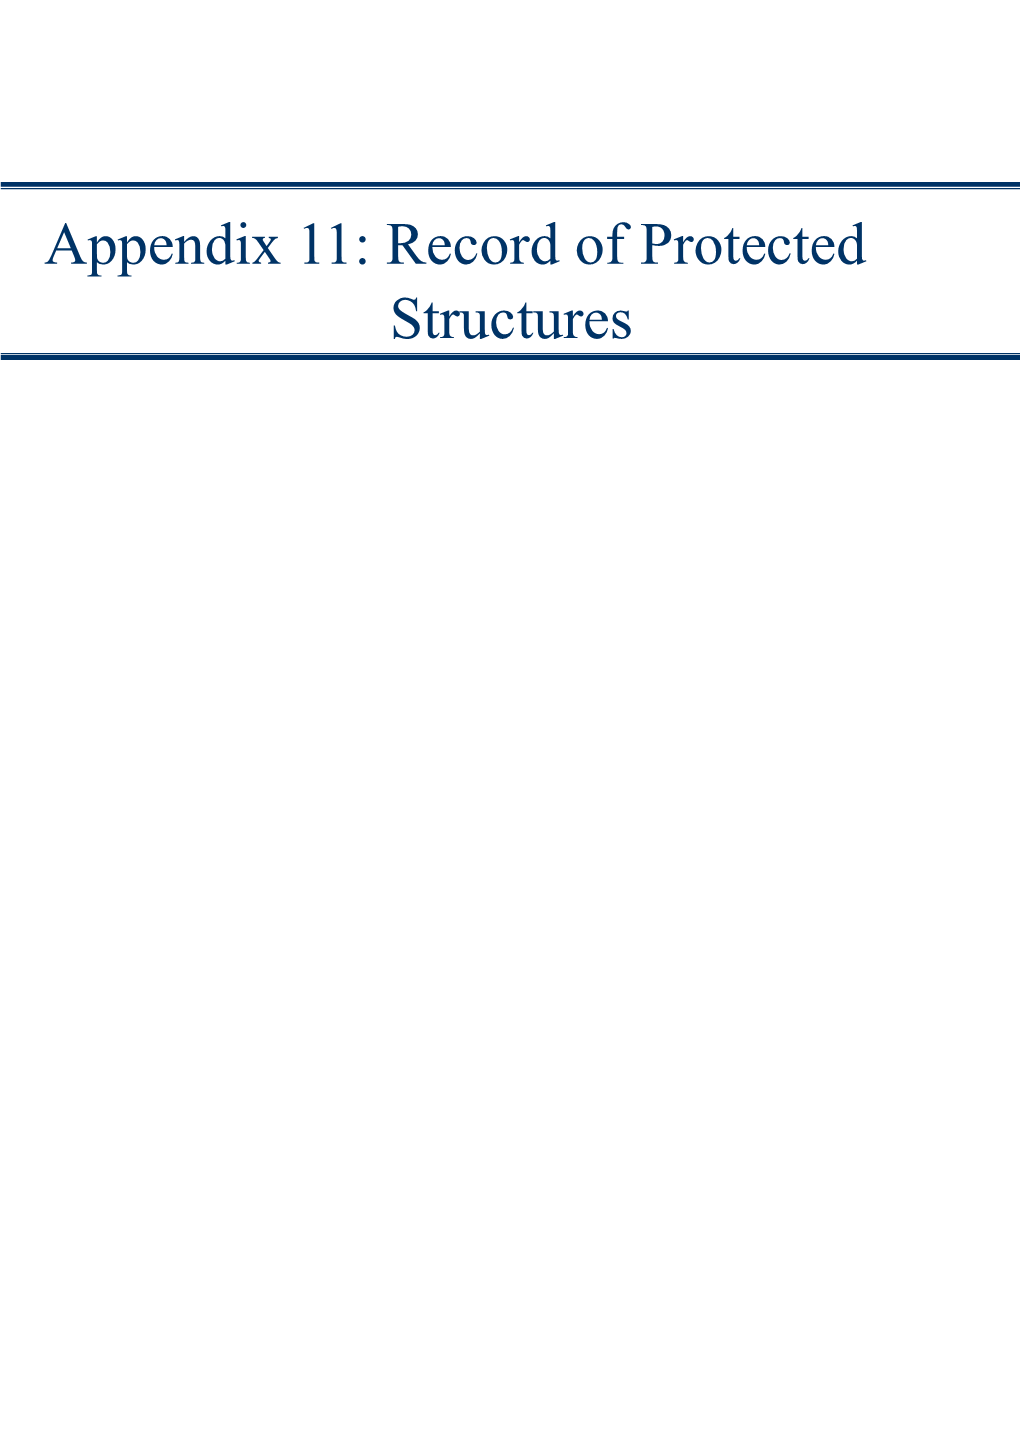 Appendix 11: Record of Protected Structures WHY PROTECT OUR ARCHITECTURAL HERITAGE?